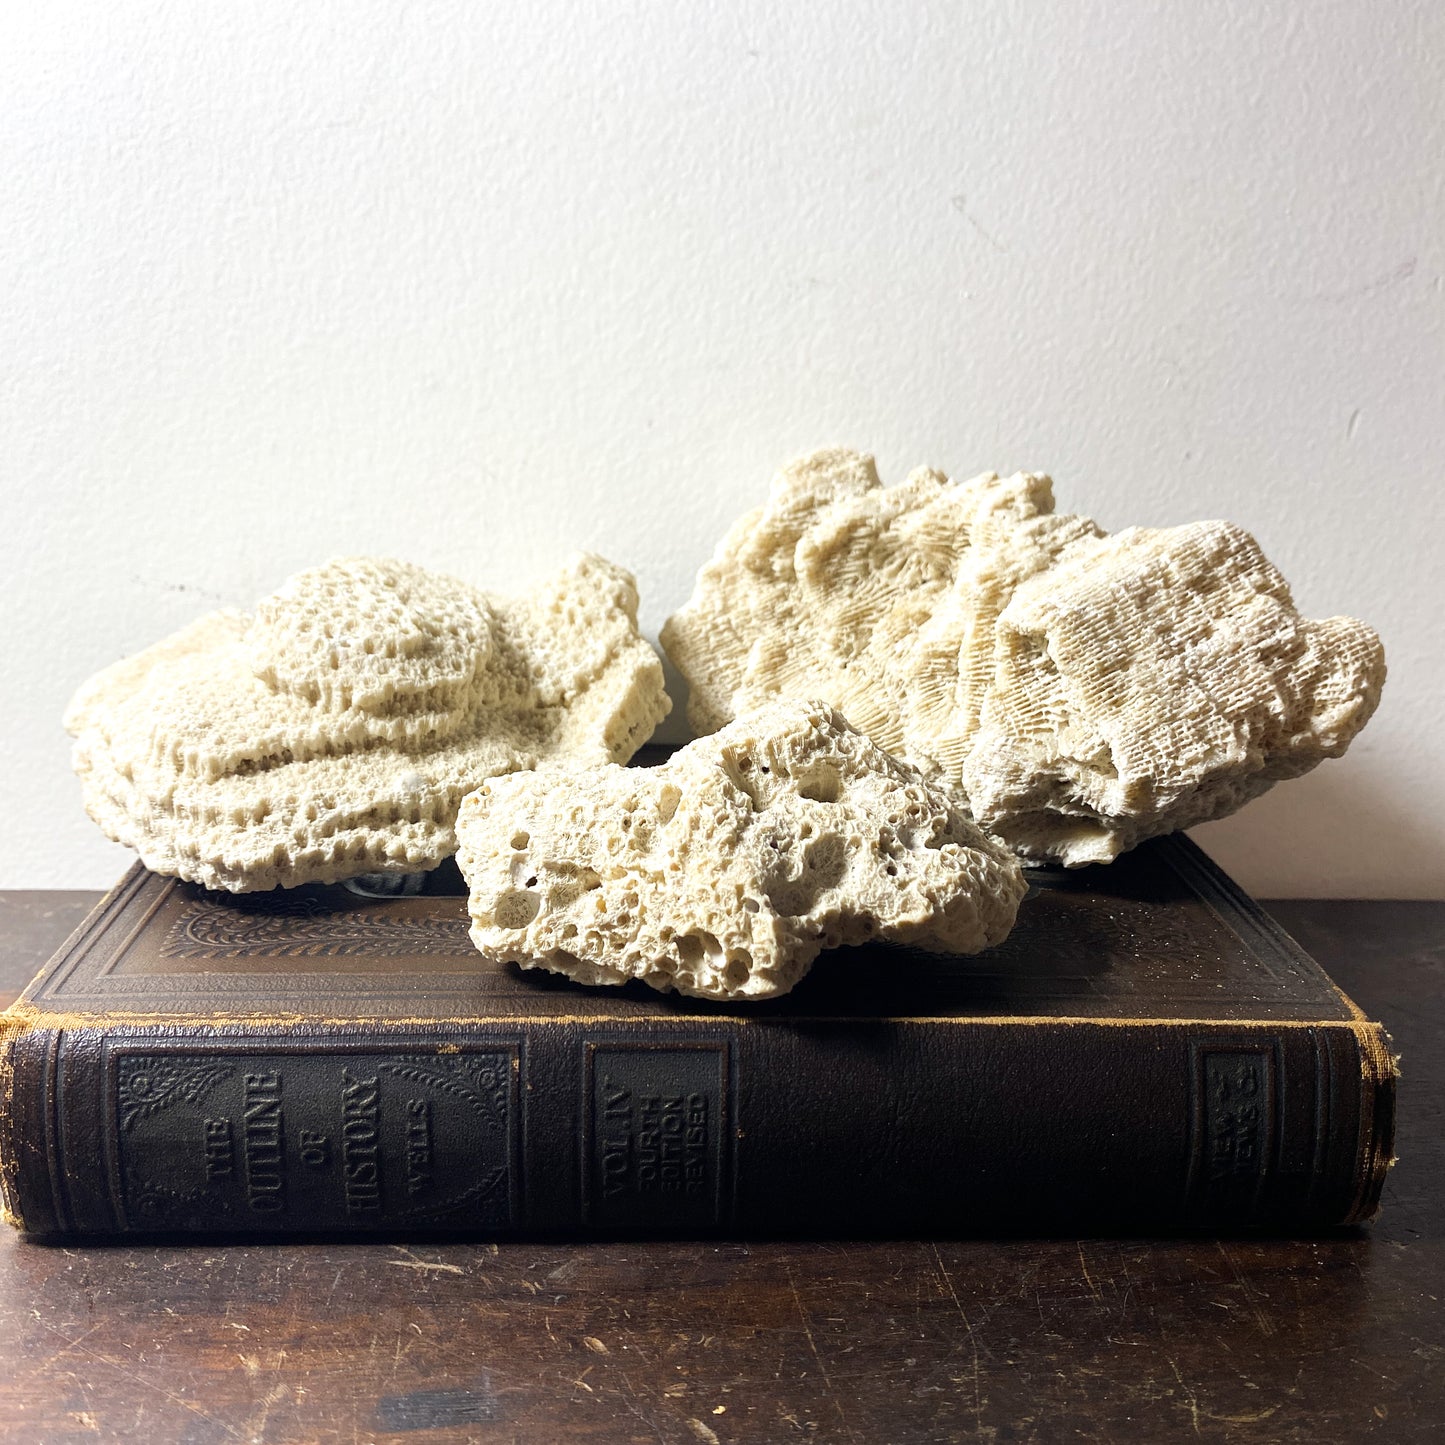 Vintage Coral Specimens, Natural History Curiosity Decorative Objects